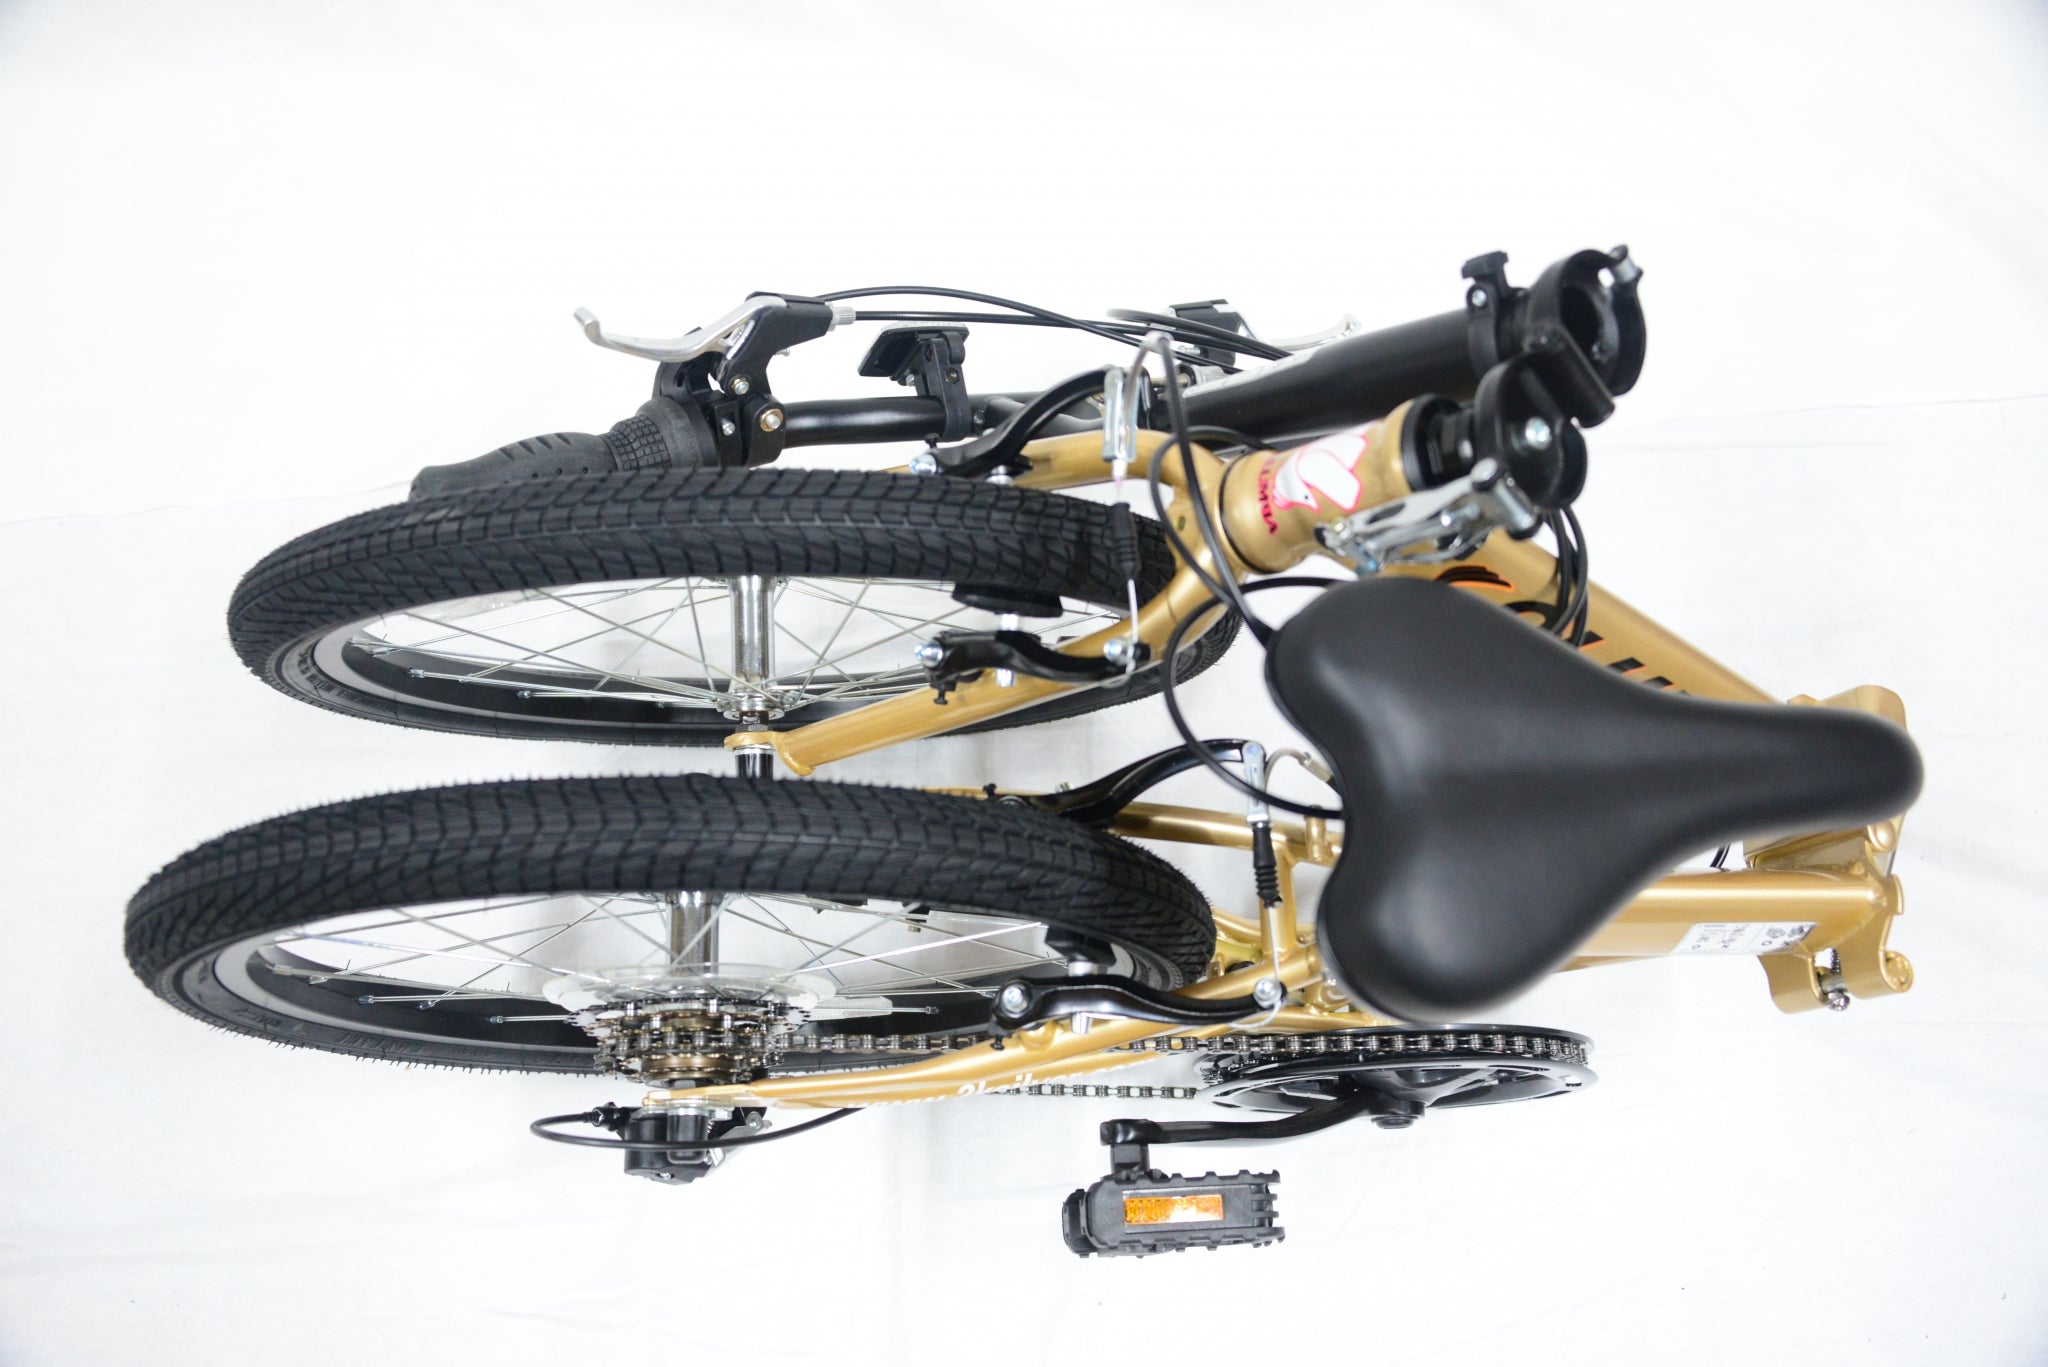 Top view of a gold folding bicycle.